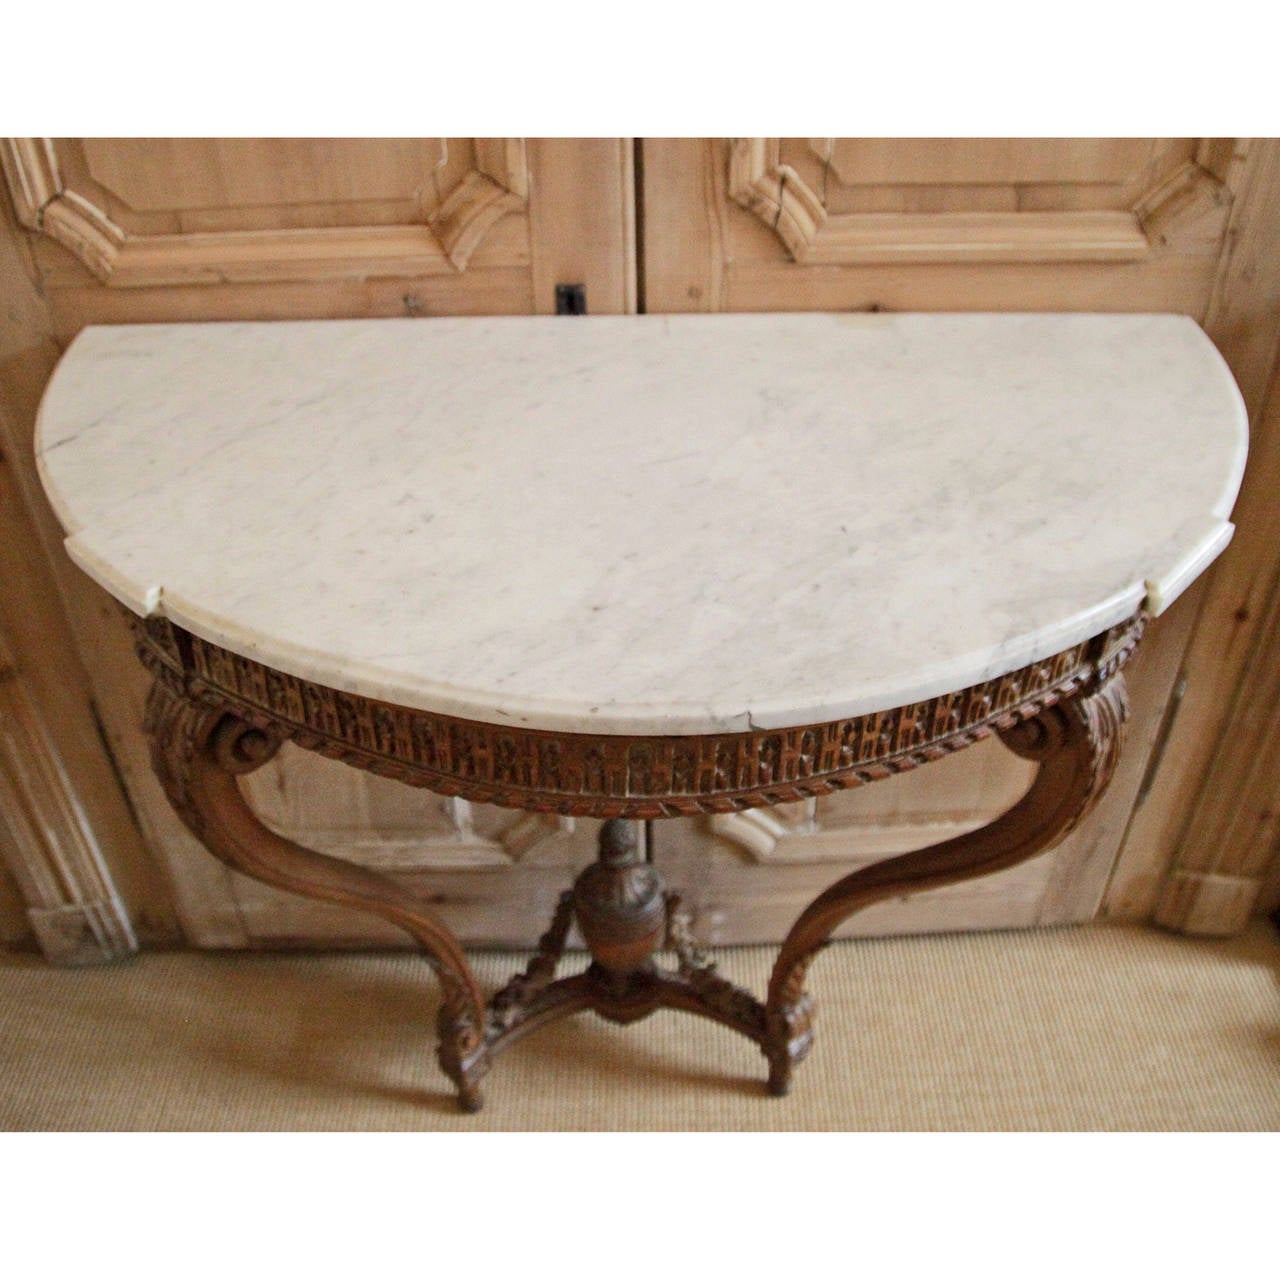 Wonderful Louis Seize Console.
Walnut with filigrane wood carvings and marble top.